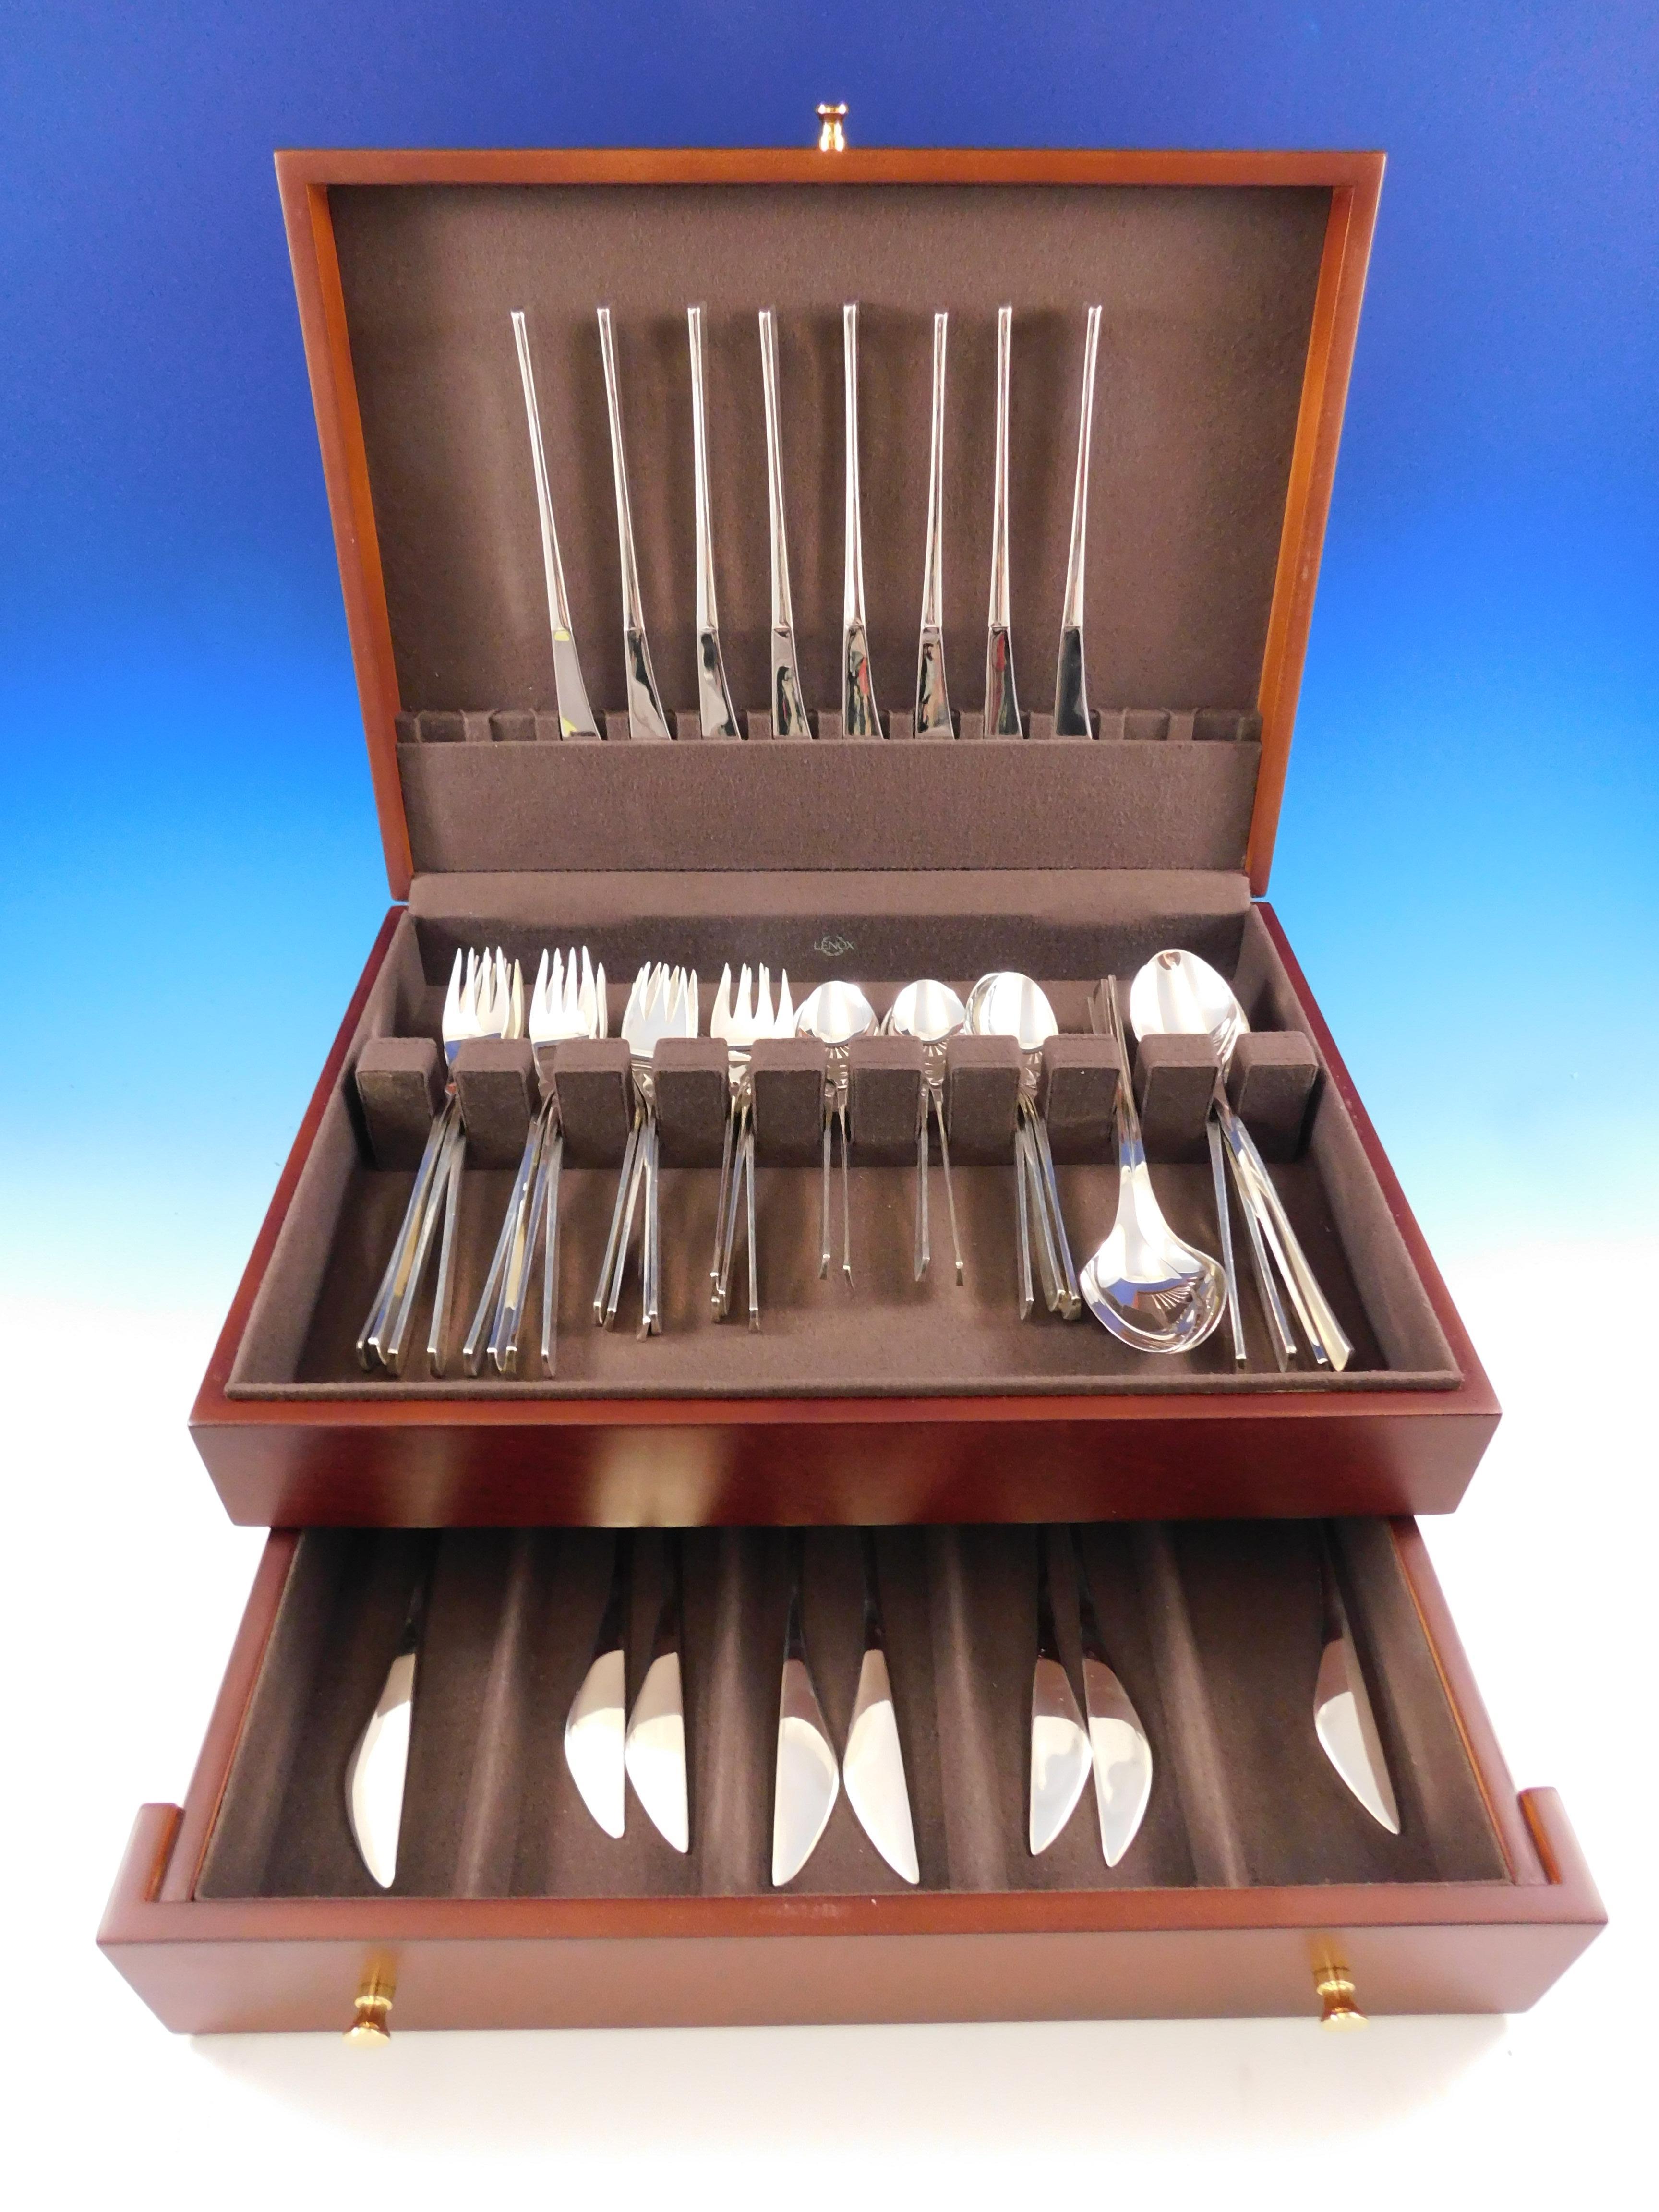 International sterling flatware in the pattern Vision designed by Ronald Hayes Pearson patented in 1961. This discontinued pattern features clean, Modernisn inspired lines and is featured in the book 